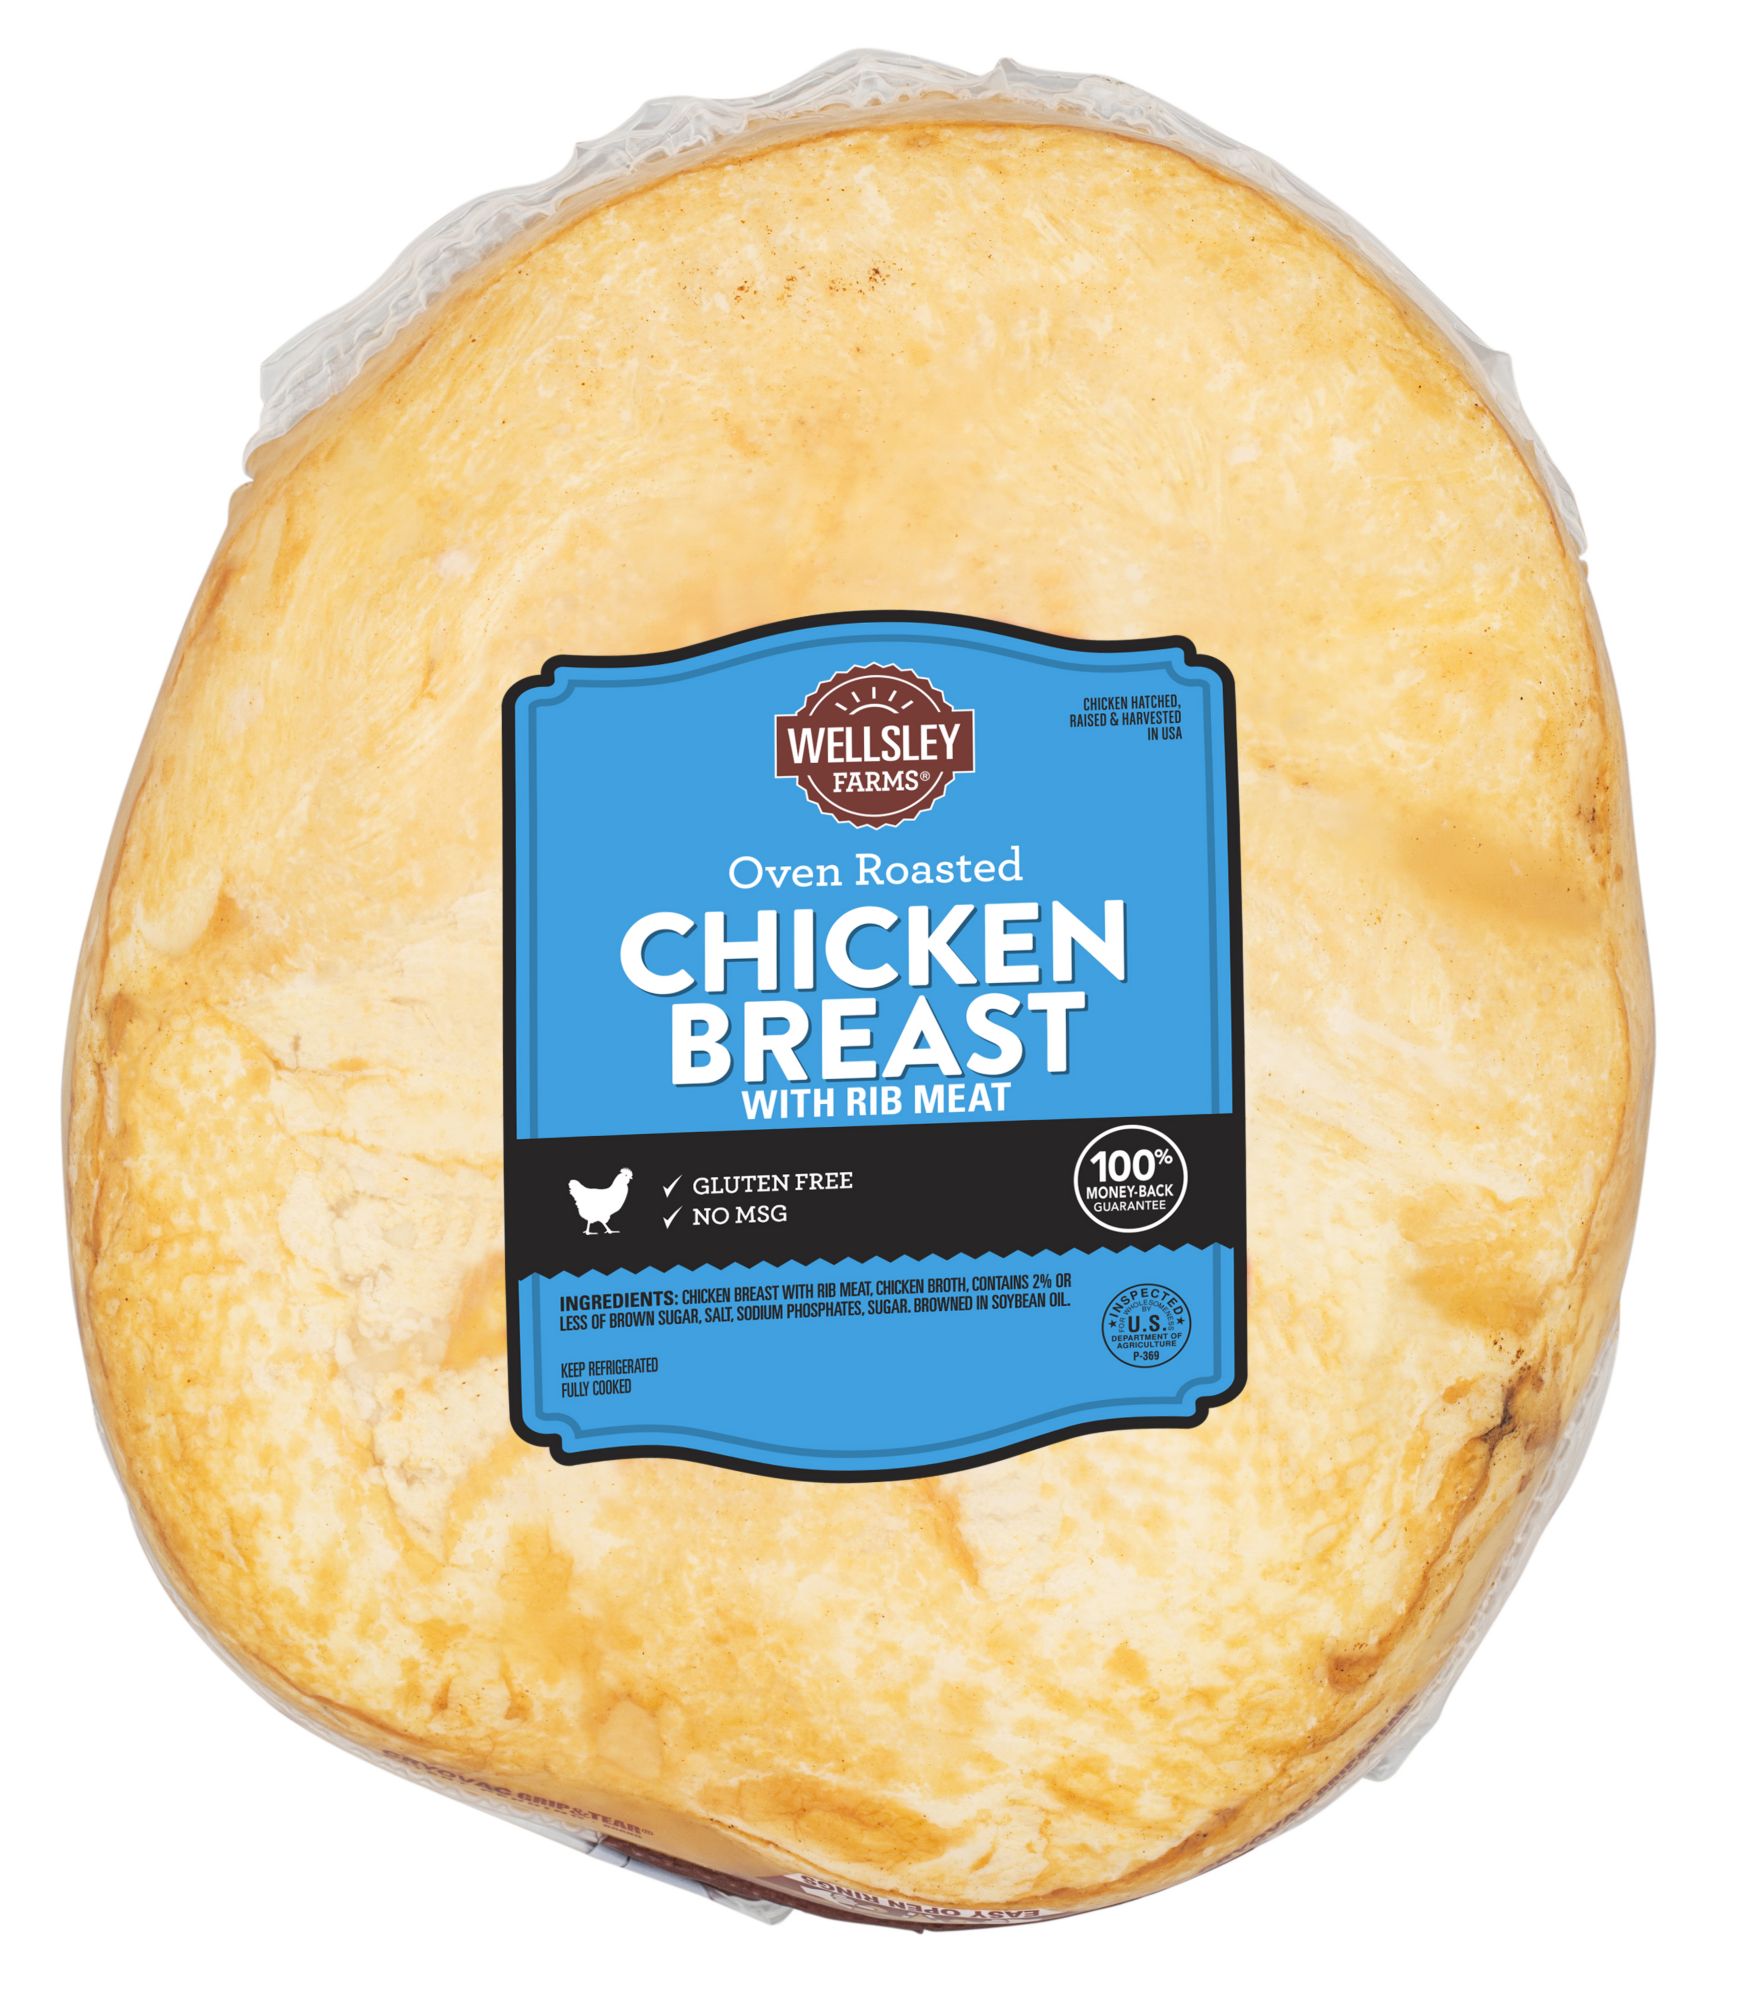 Oven-Roasted Chicken Breast, 0.75-1.5 lb Standard Cut